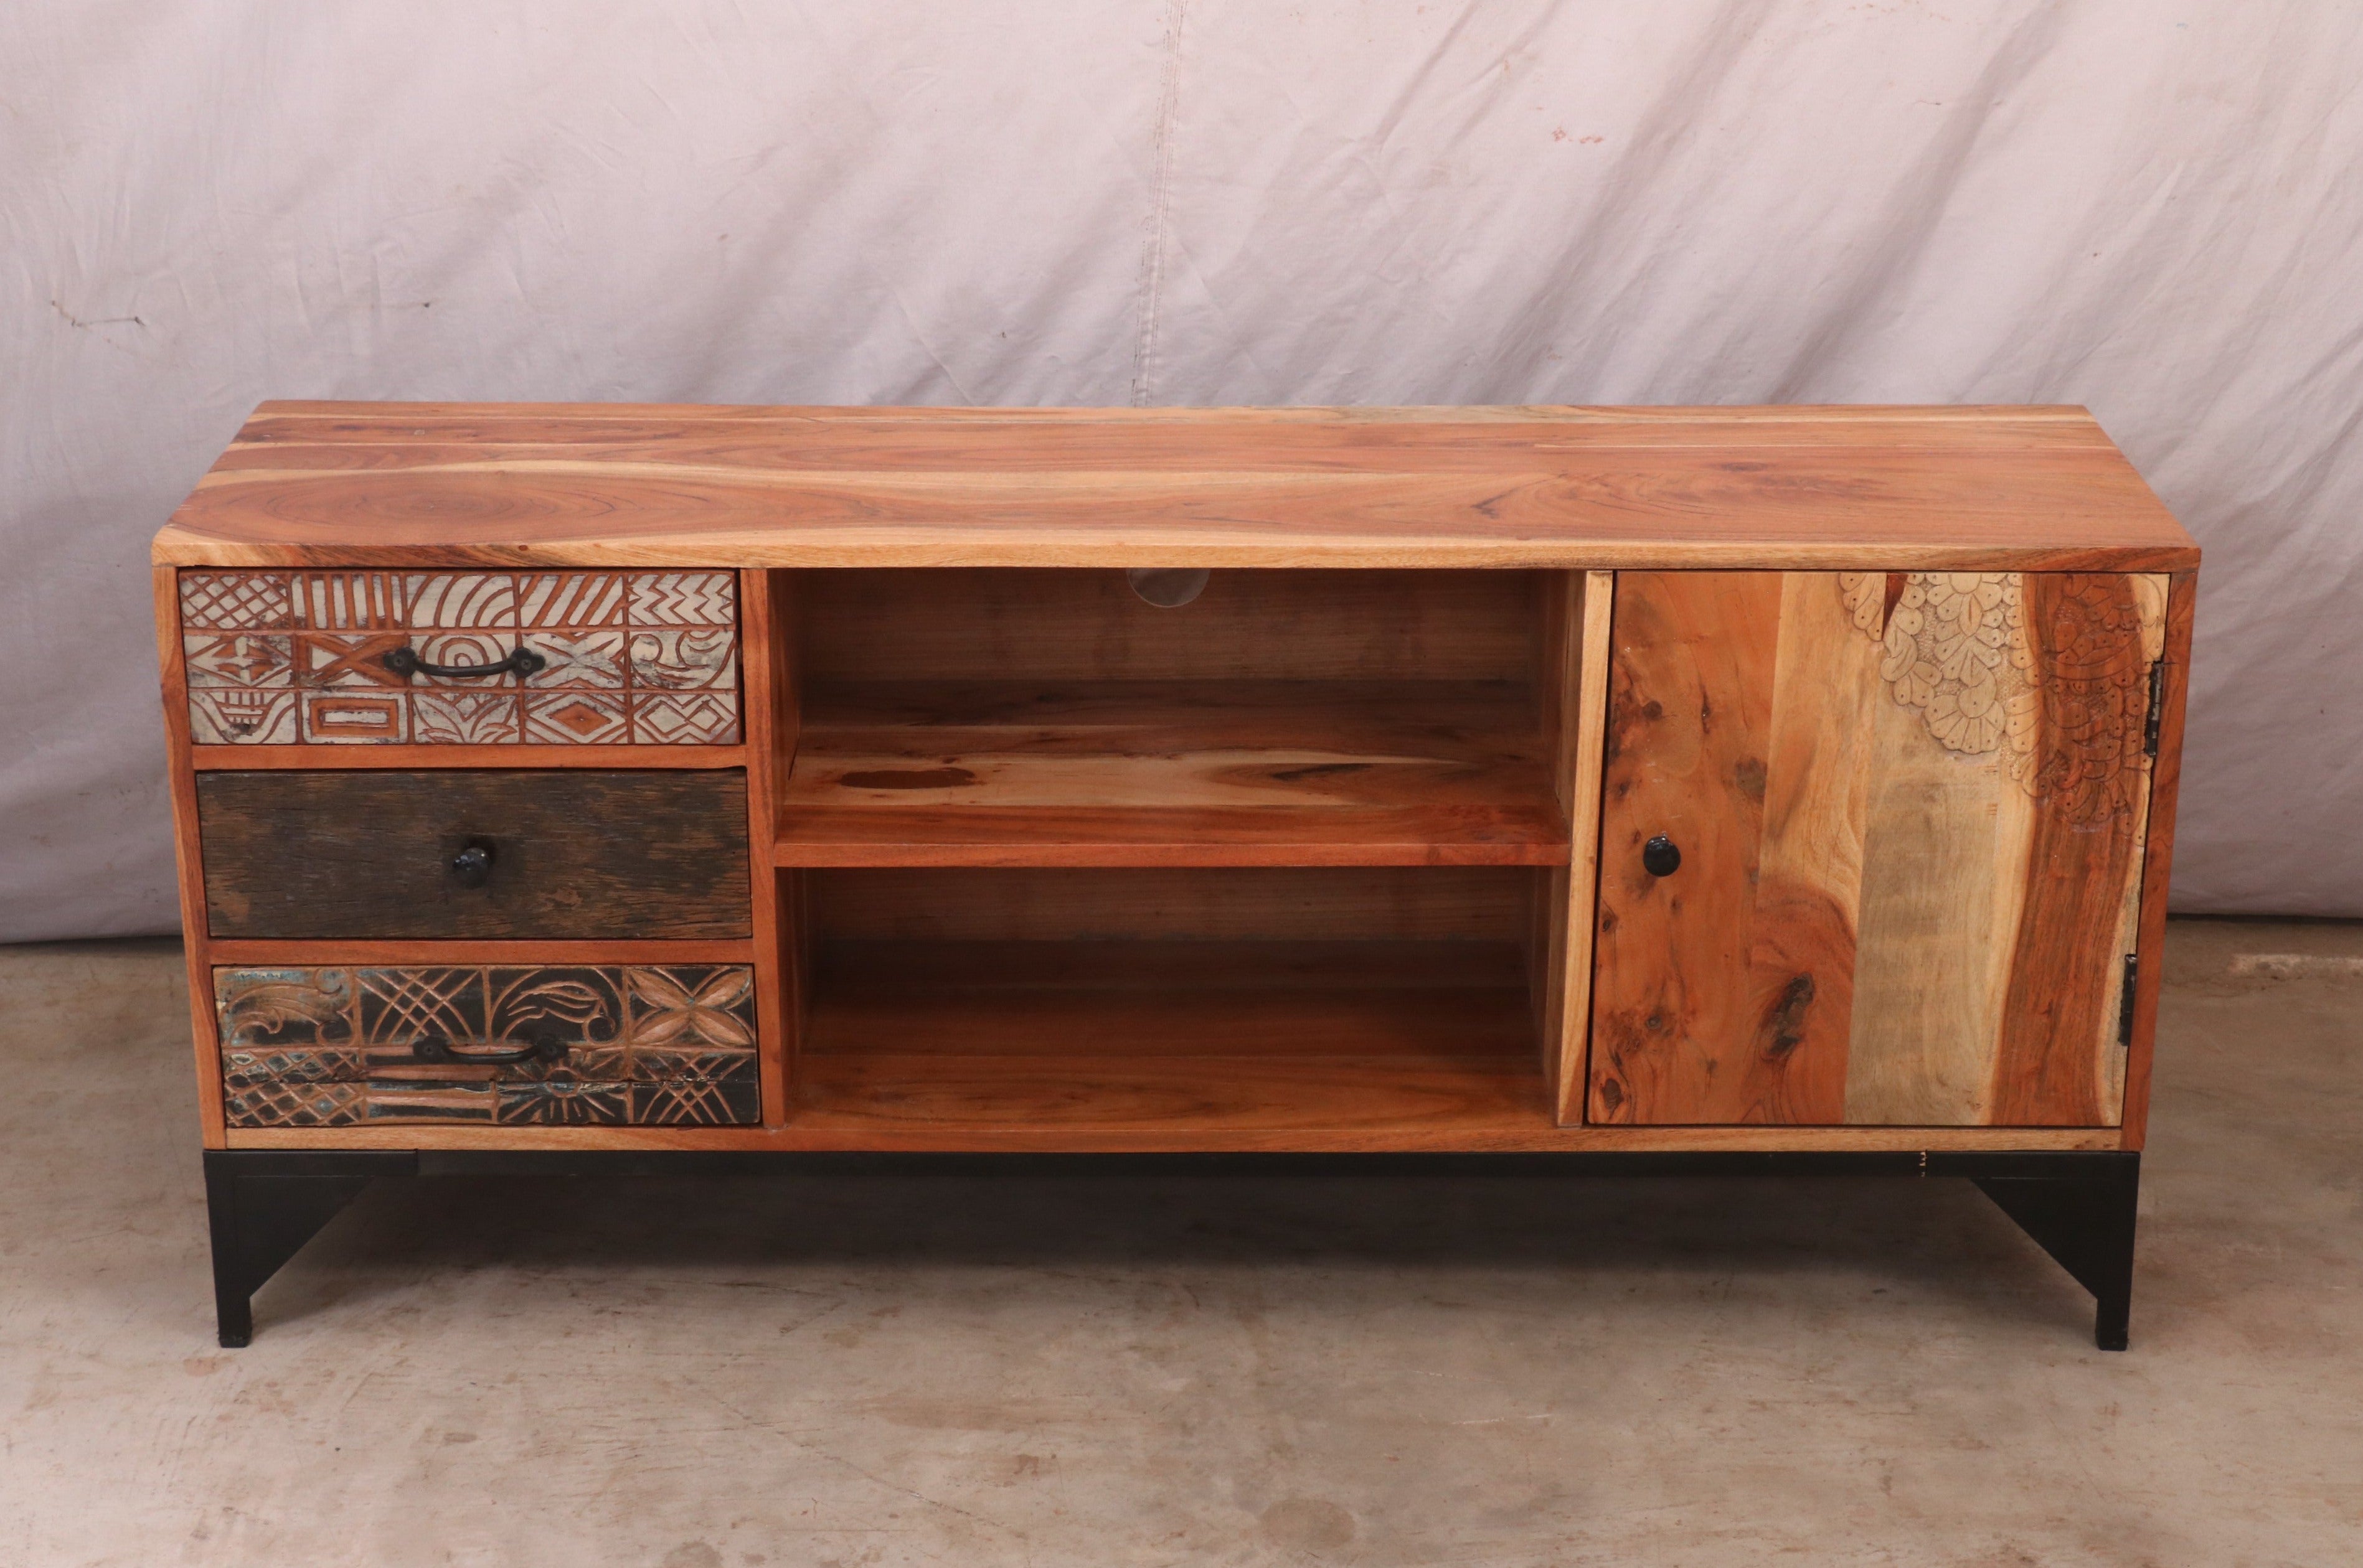 Antique Old Vintage Finish Multispace Wooden Handmade TV Stand Tv stand